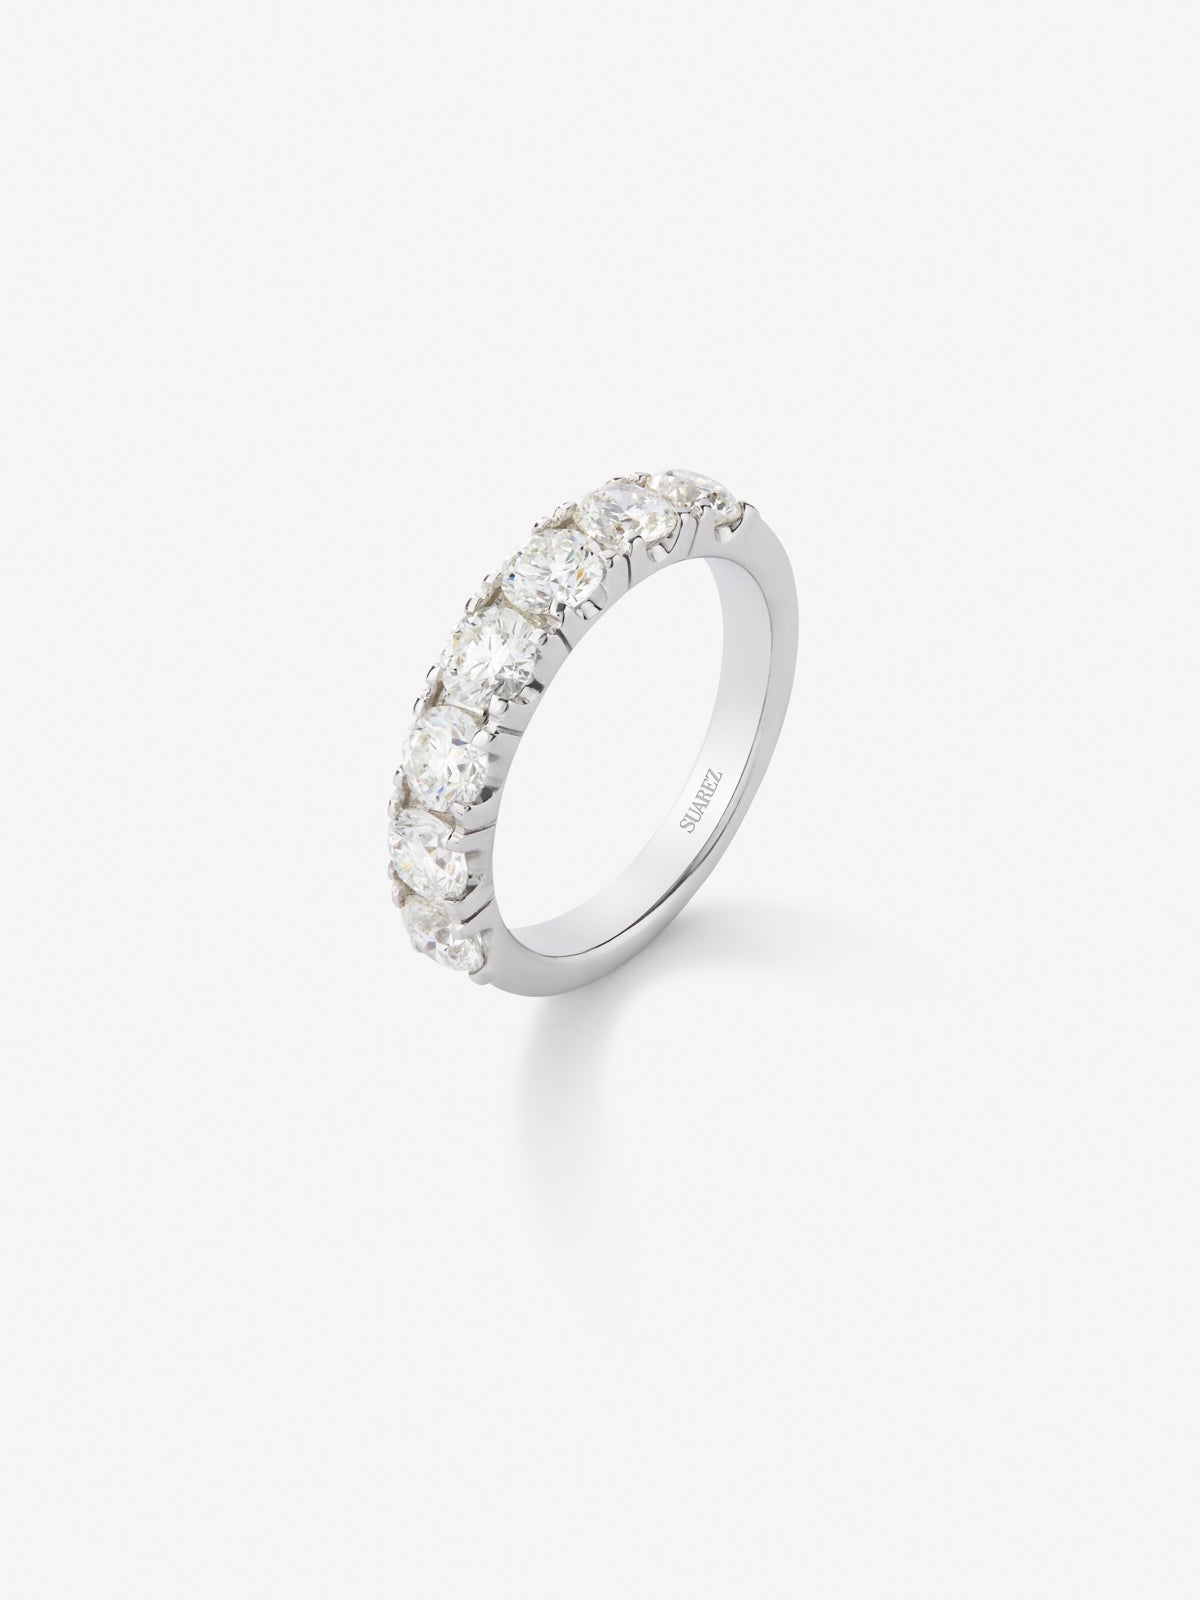 Half ring in 18K white gold with 7 brilliant-cut diamonds with a total of 1.77 cts